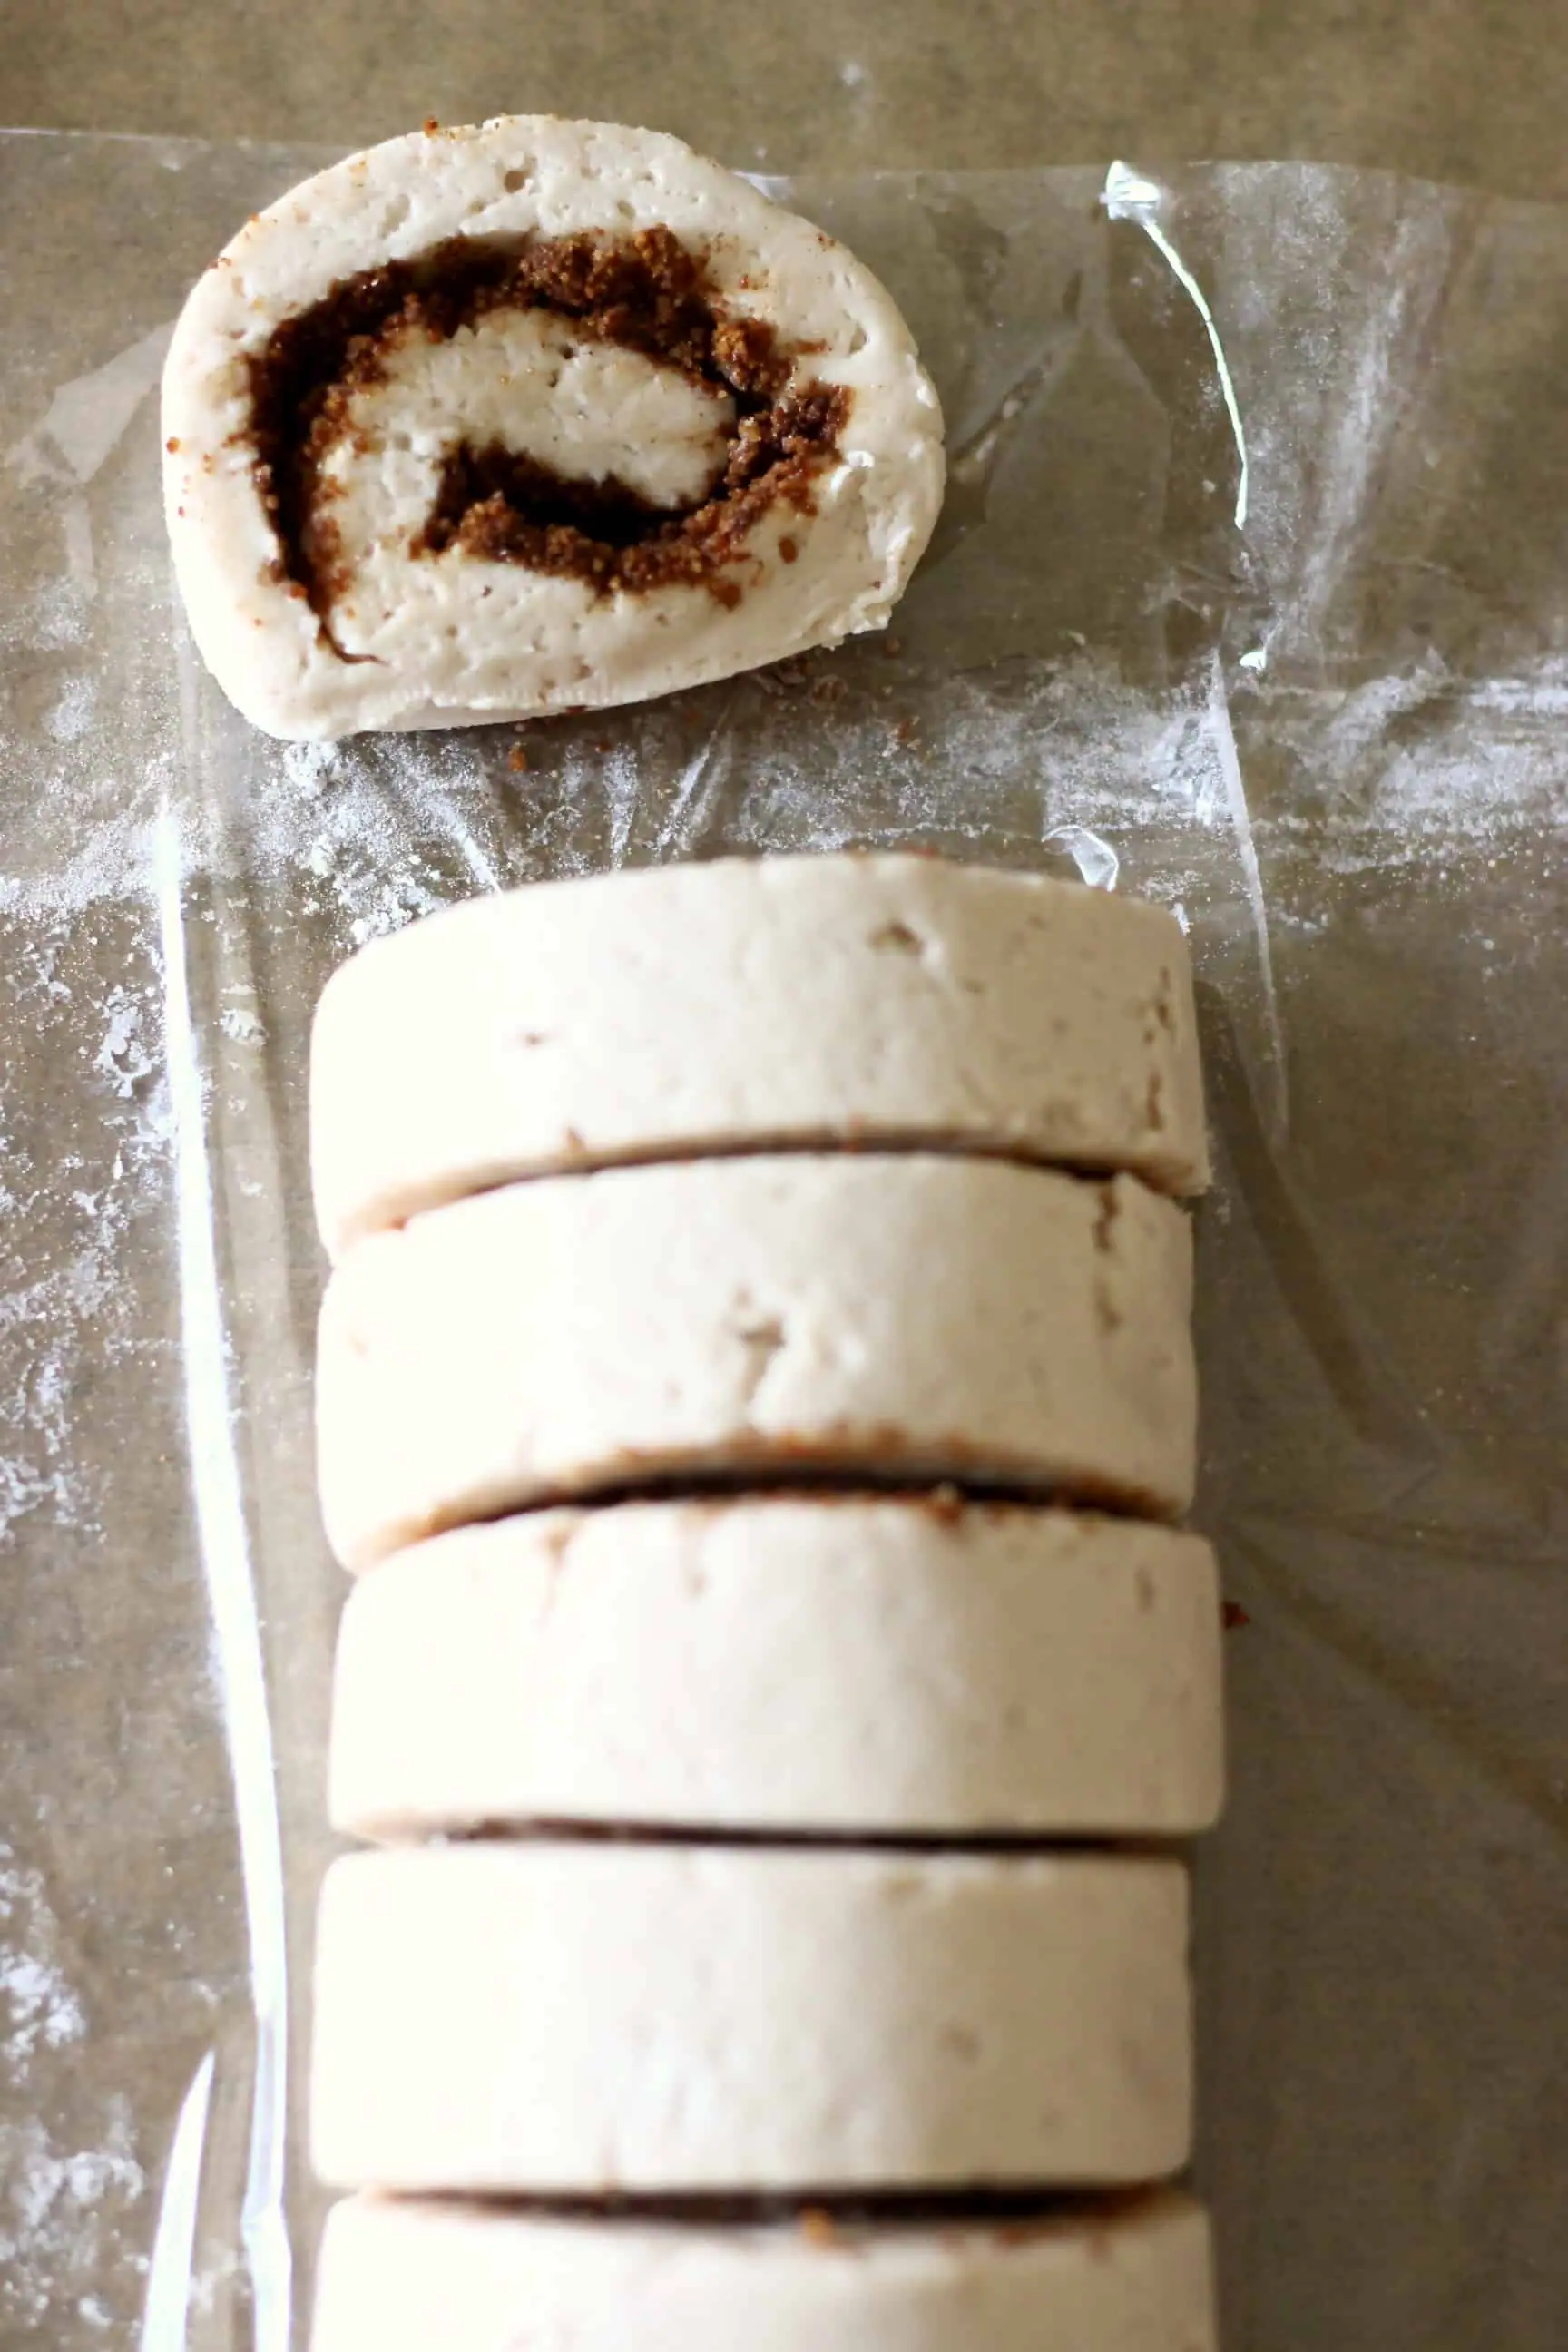 A roll of gluten-free vegan cinnamon roll dough filled with cinnamon sugar being cut into pieces 